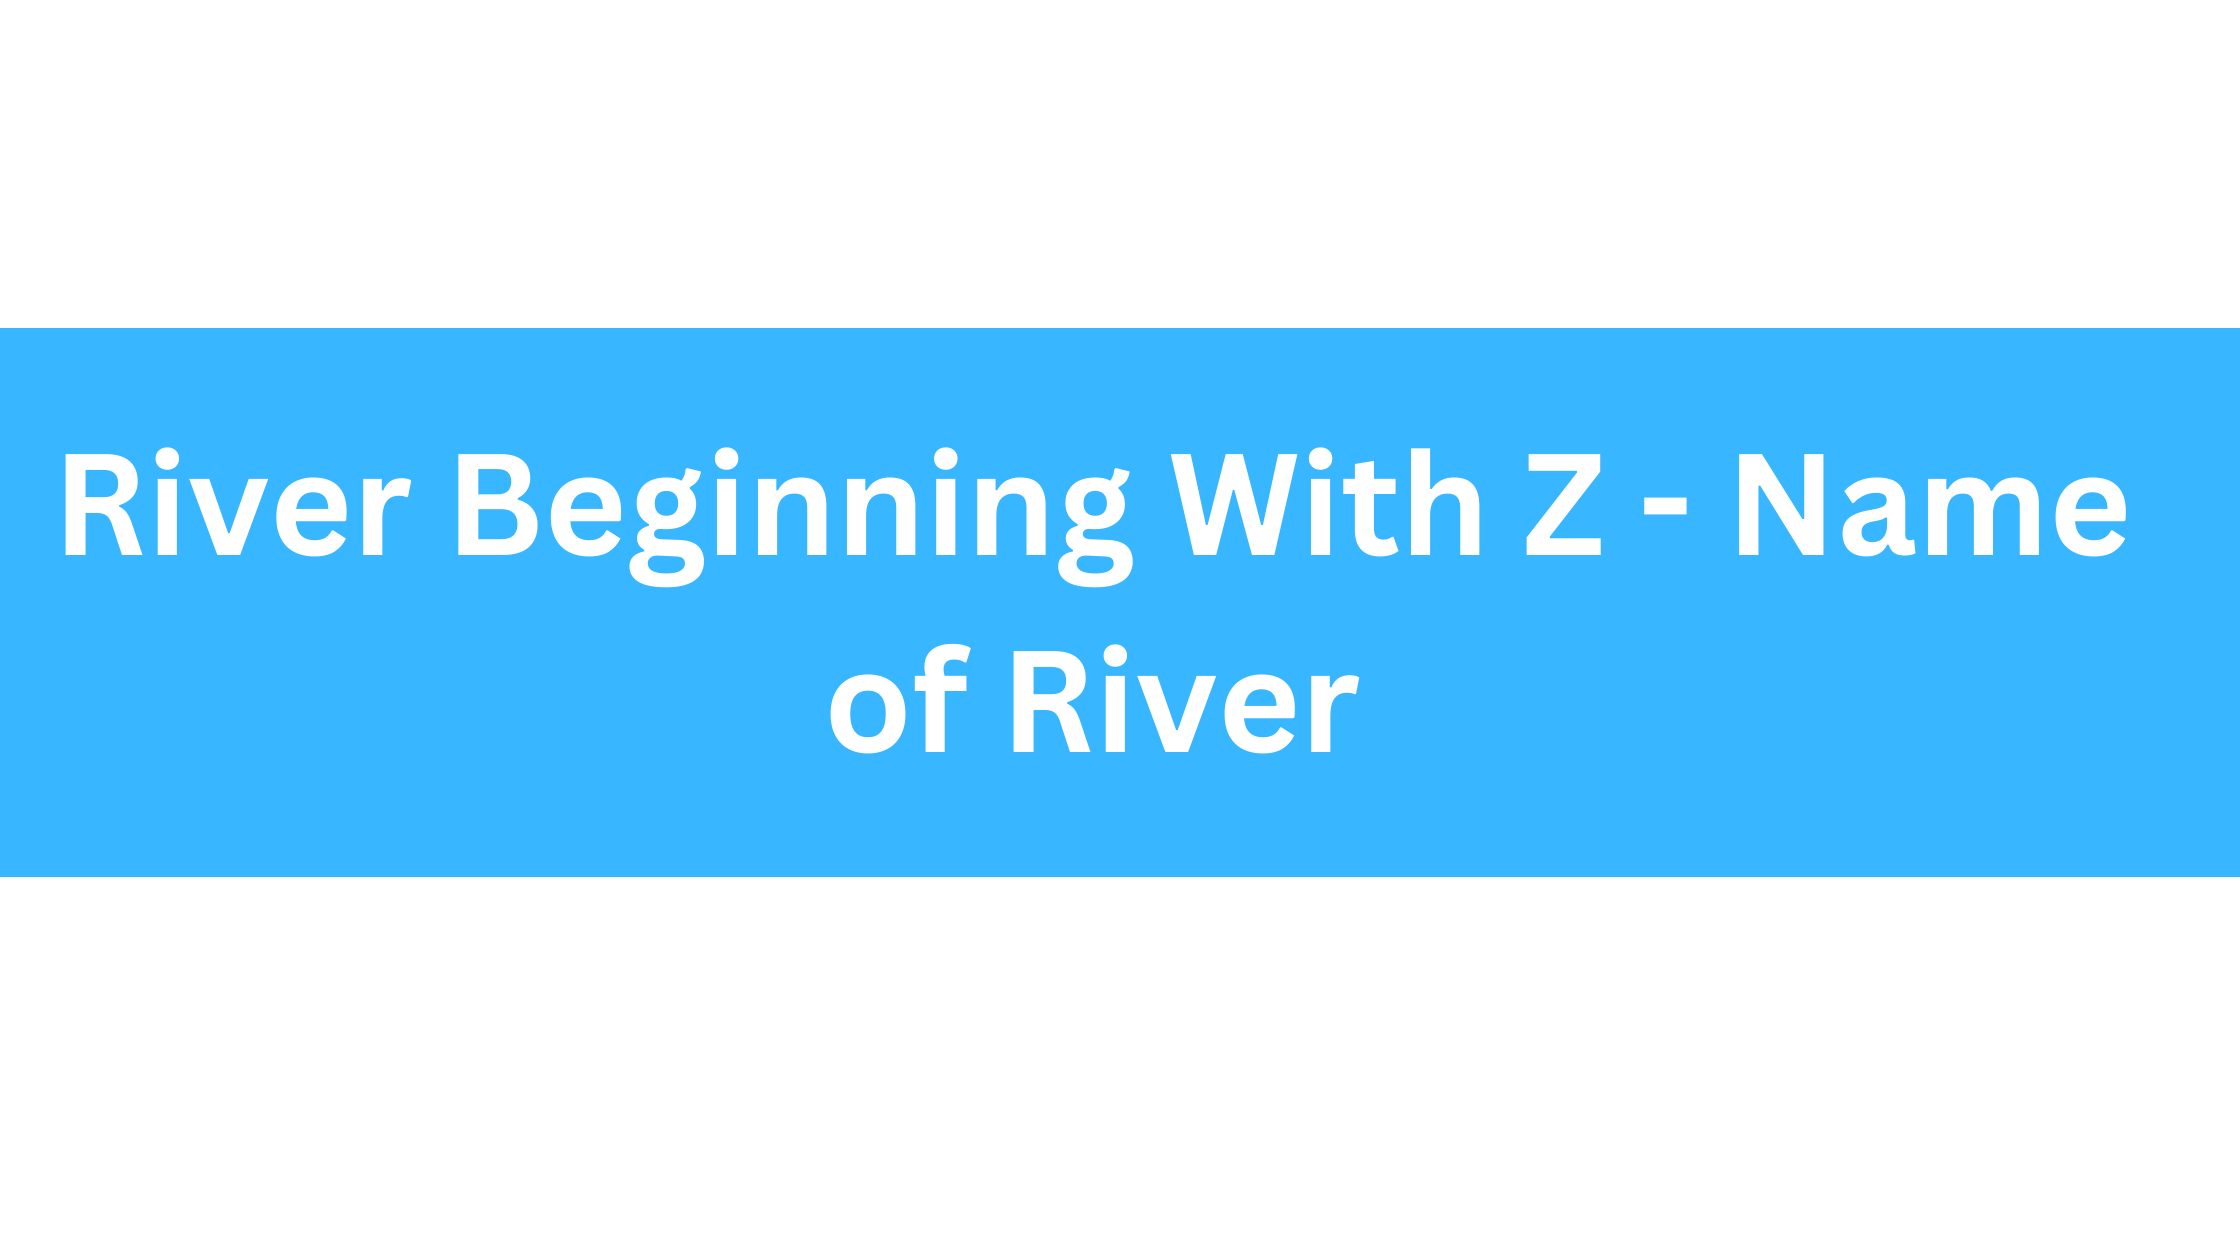 River Beginning With Z